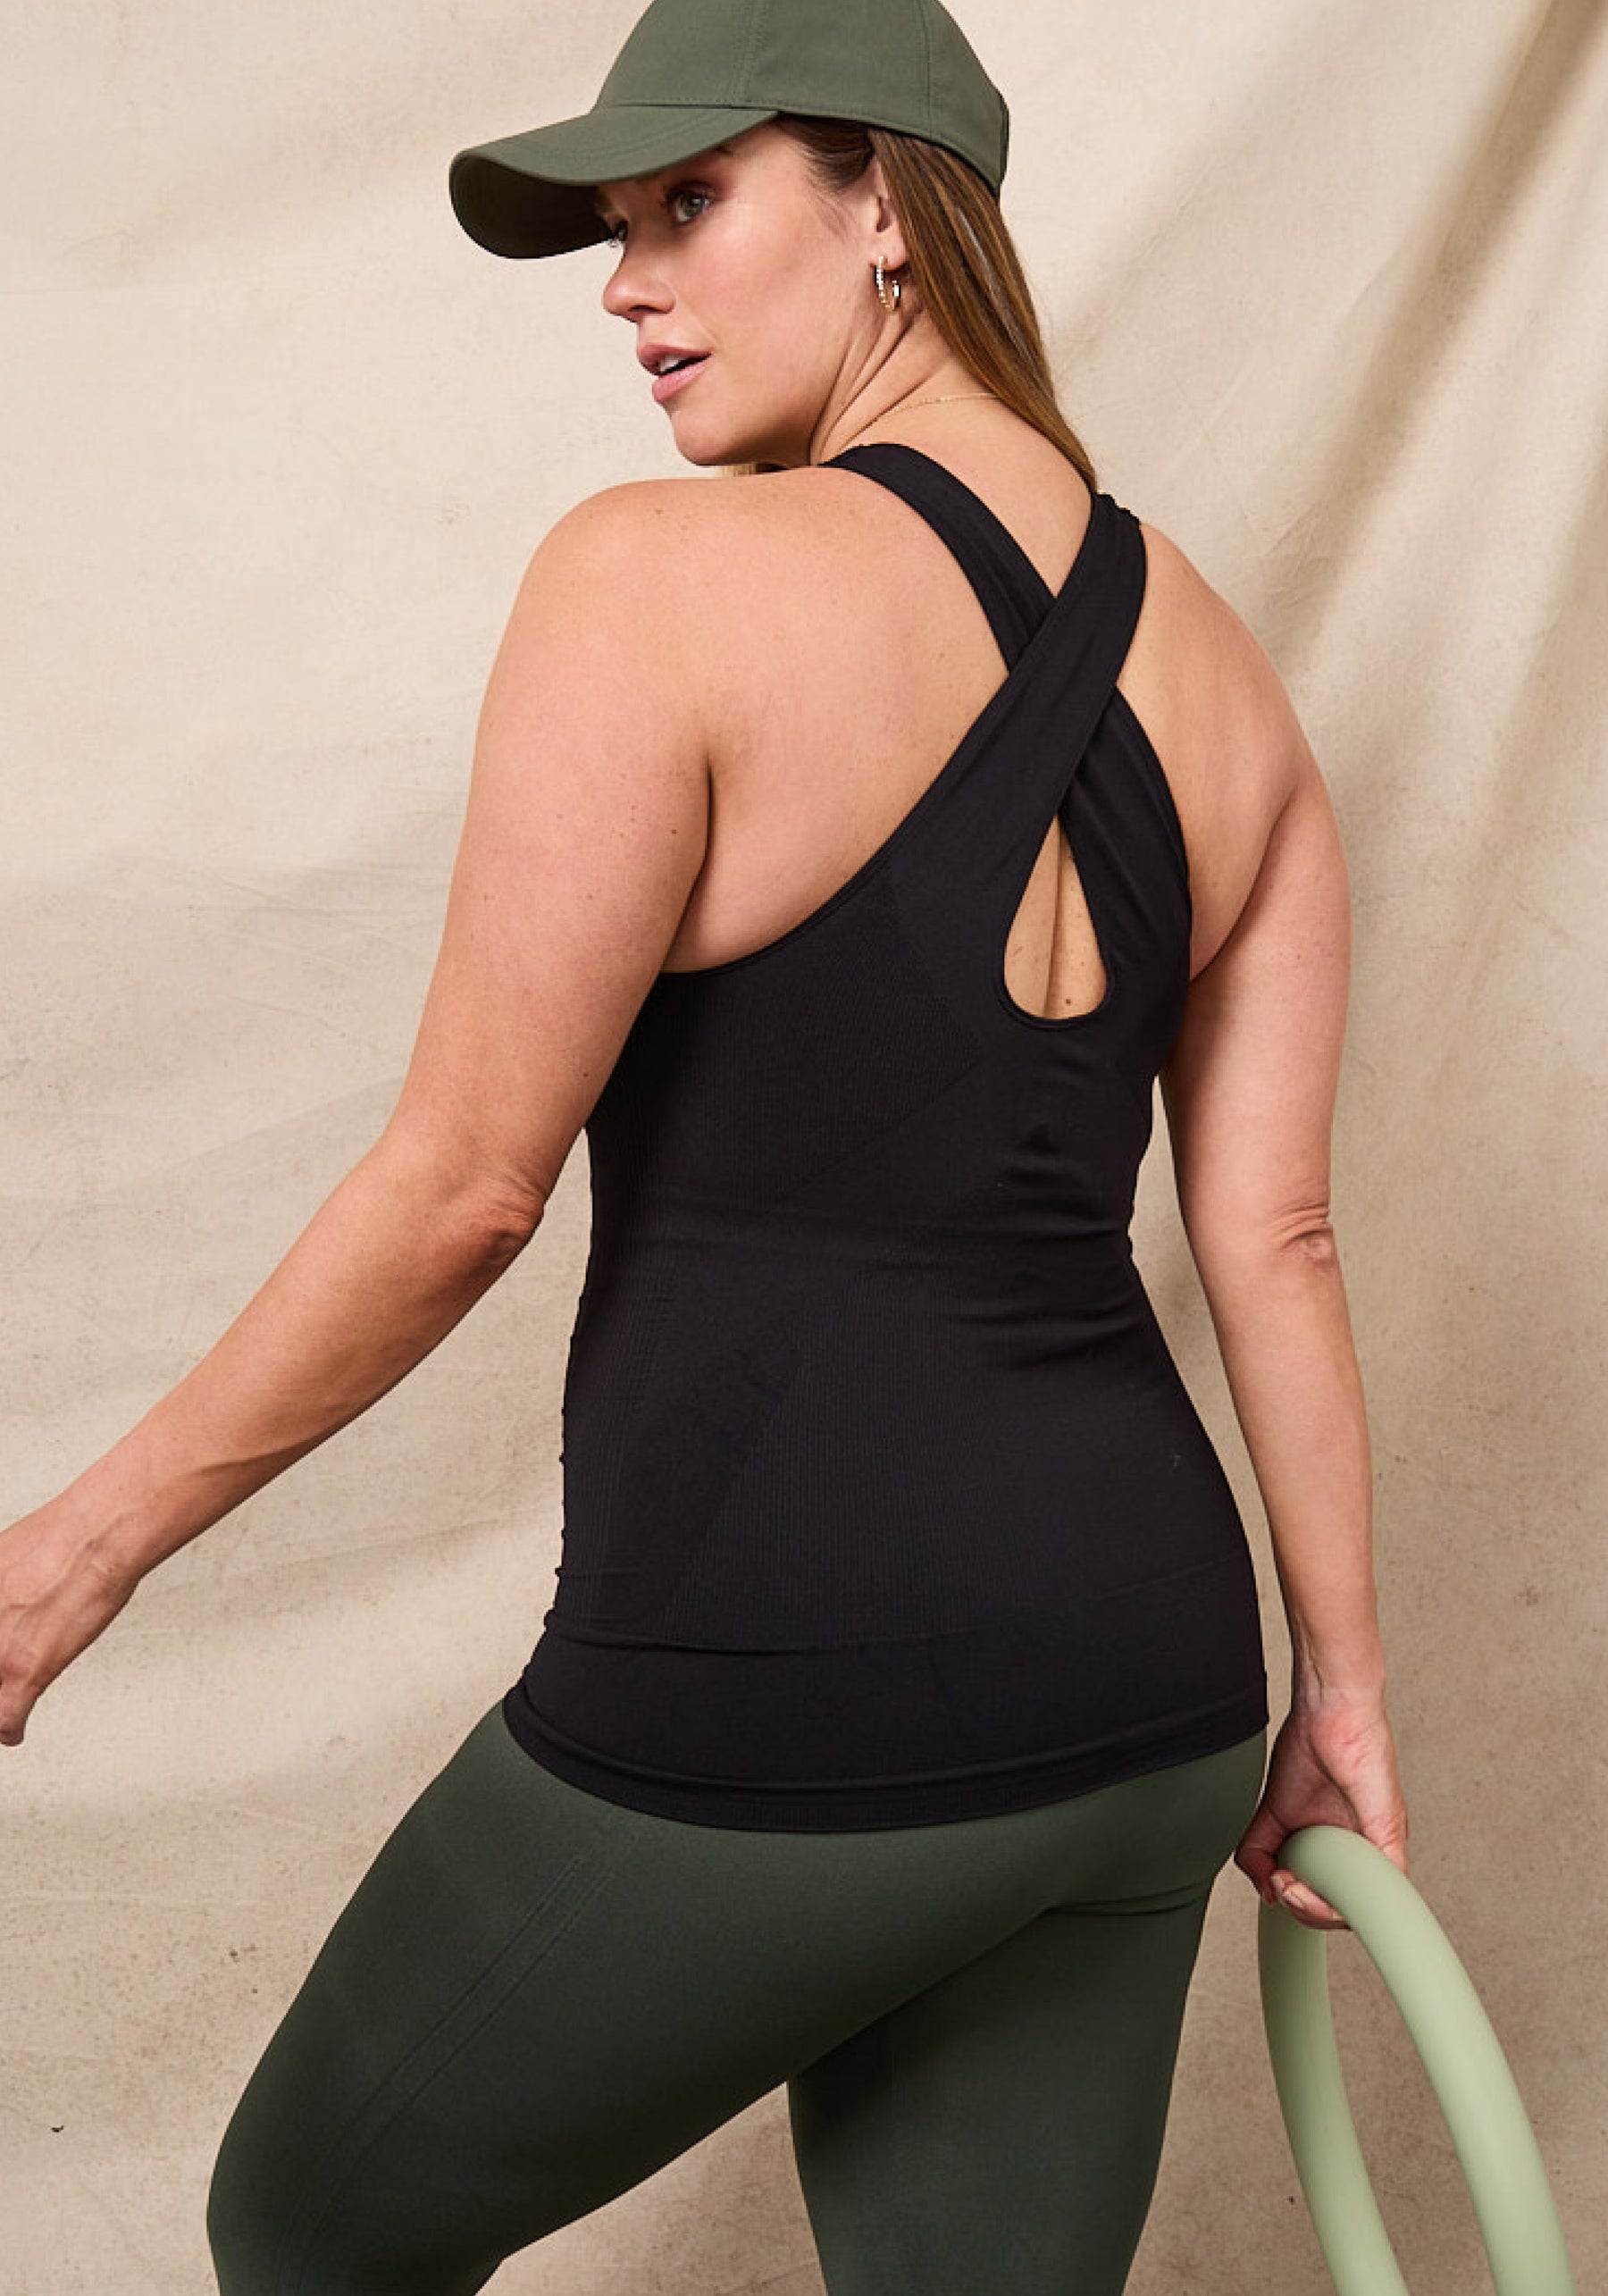 Lululemon Zoned In Tight Size 4, Women's Fashion, Clothes on Carousell